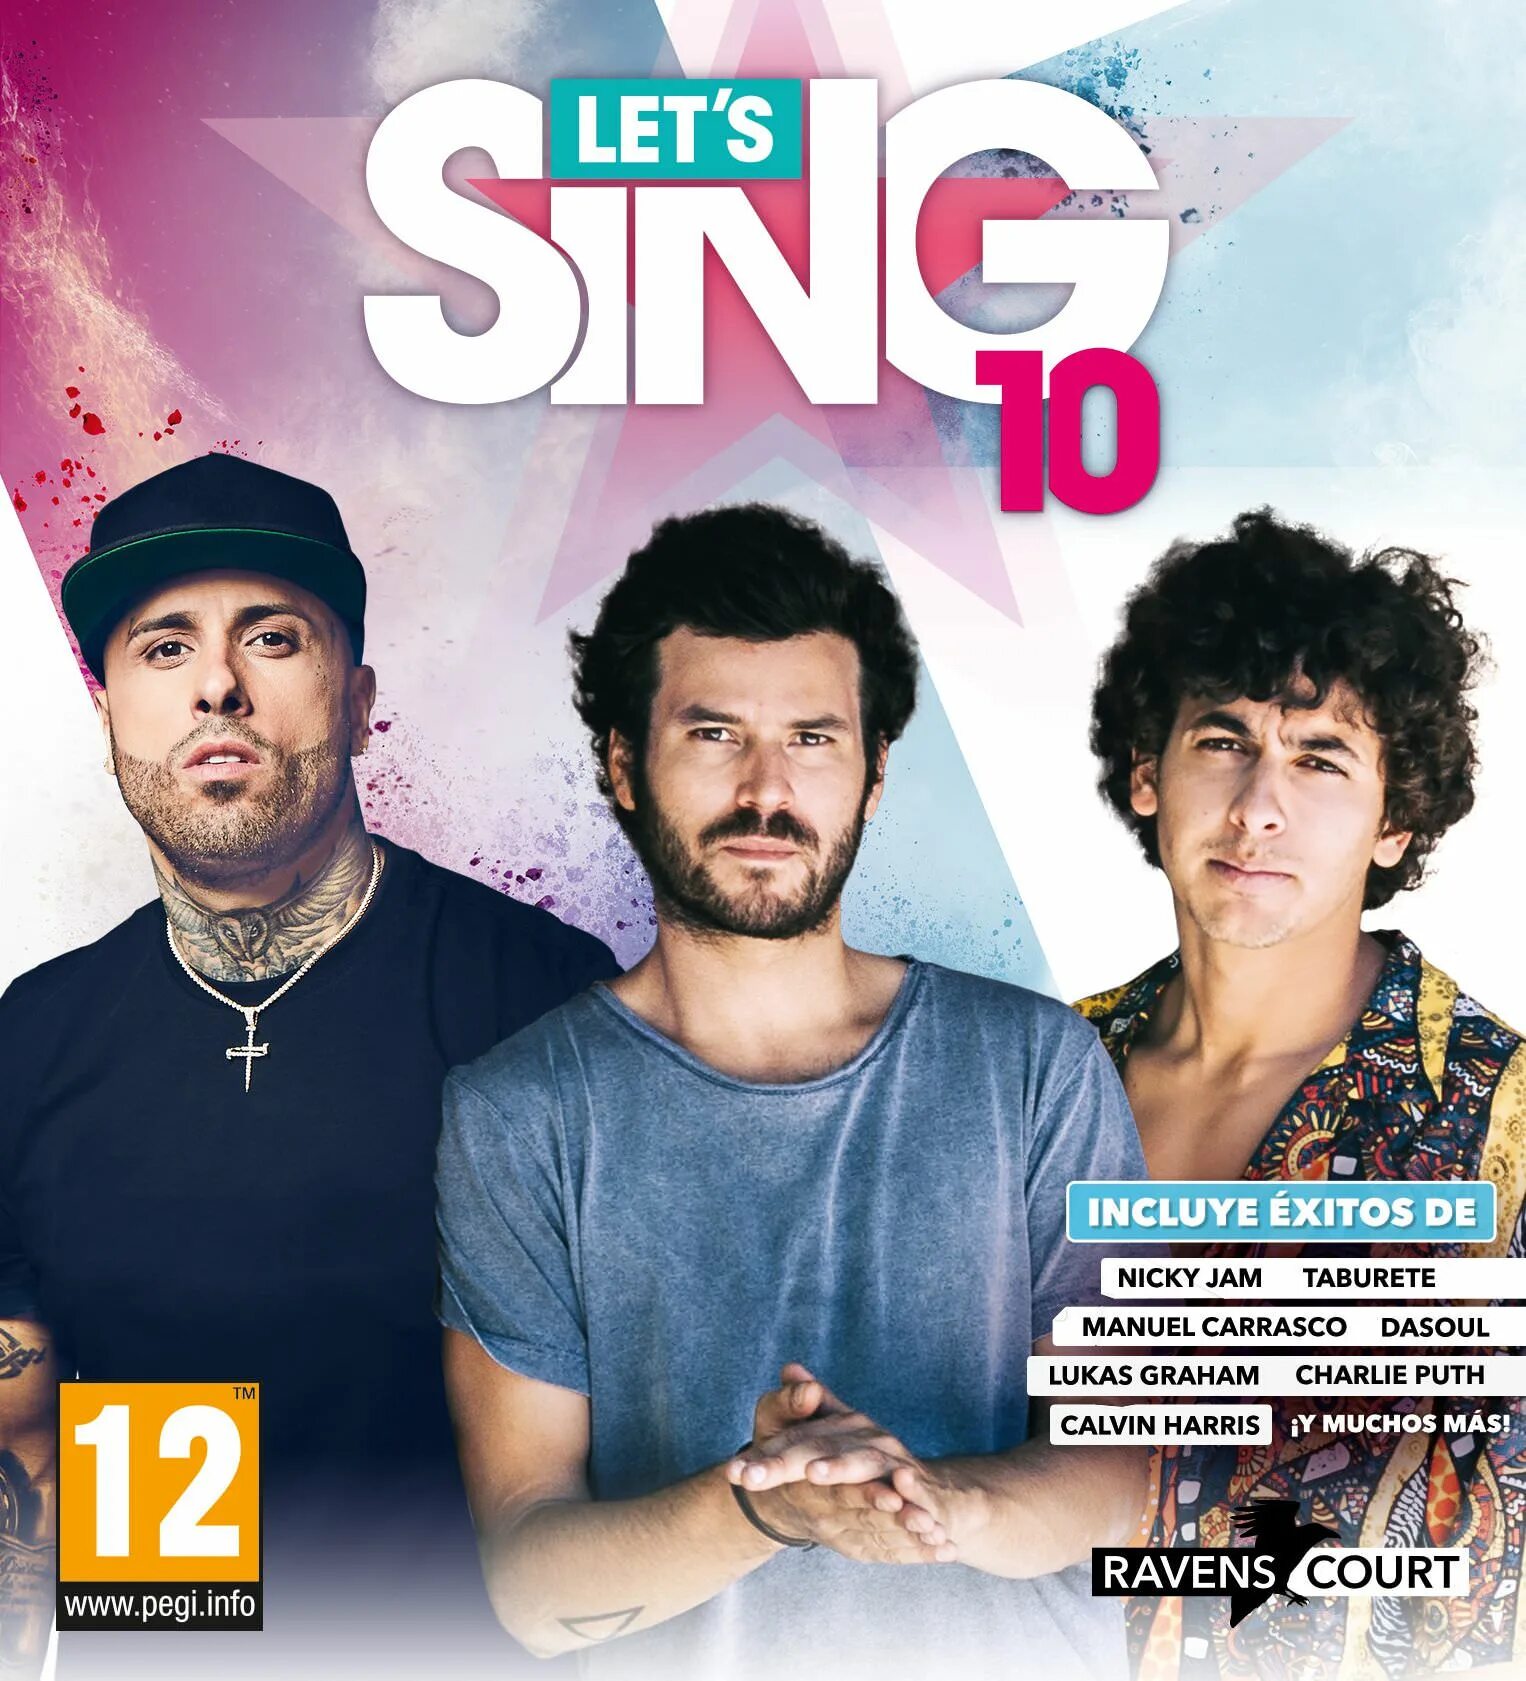 The sing 10. Let me out игра.